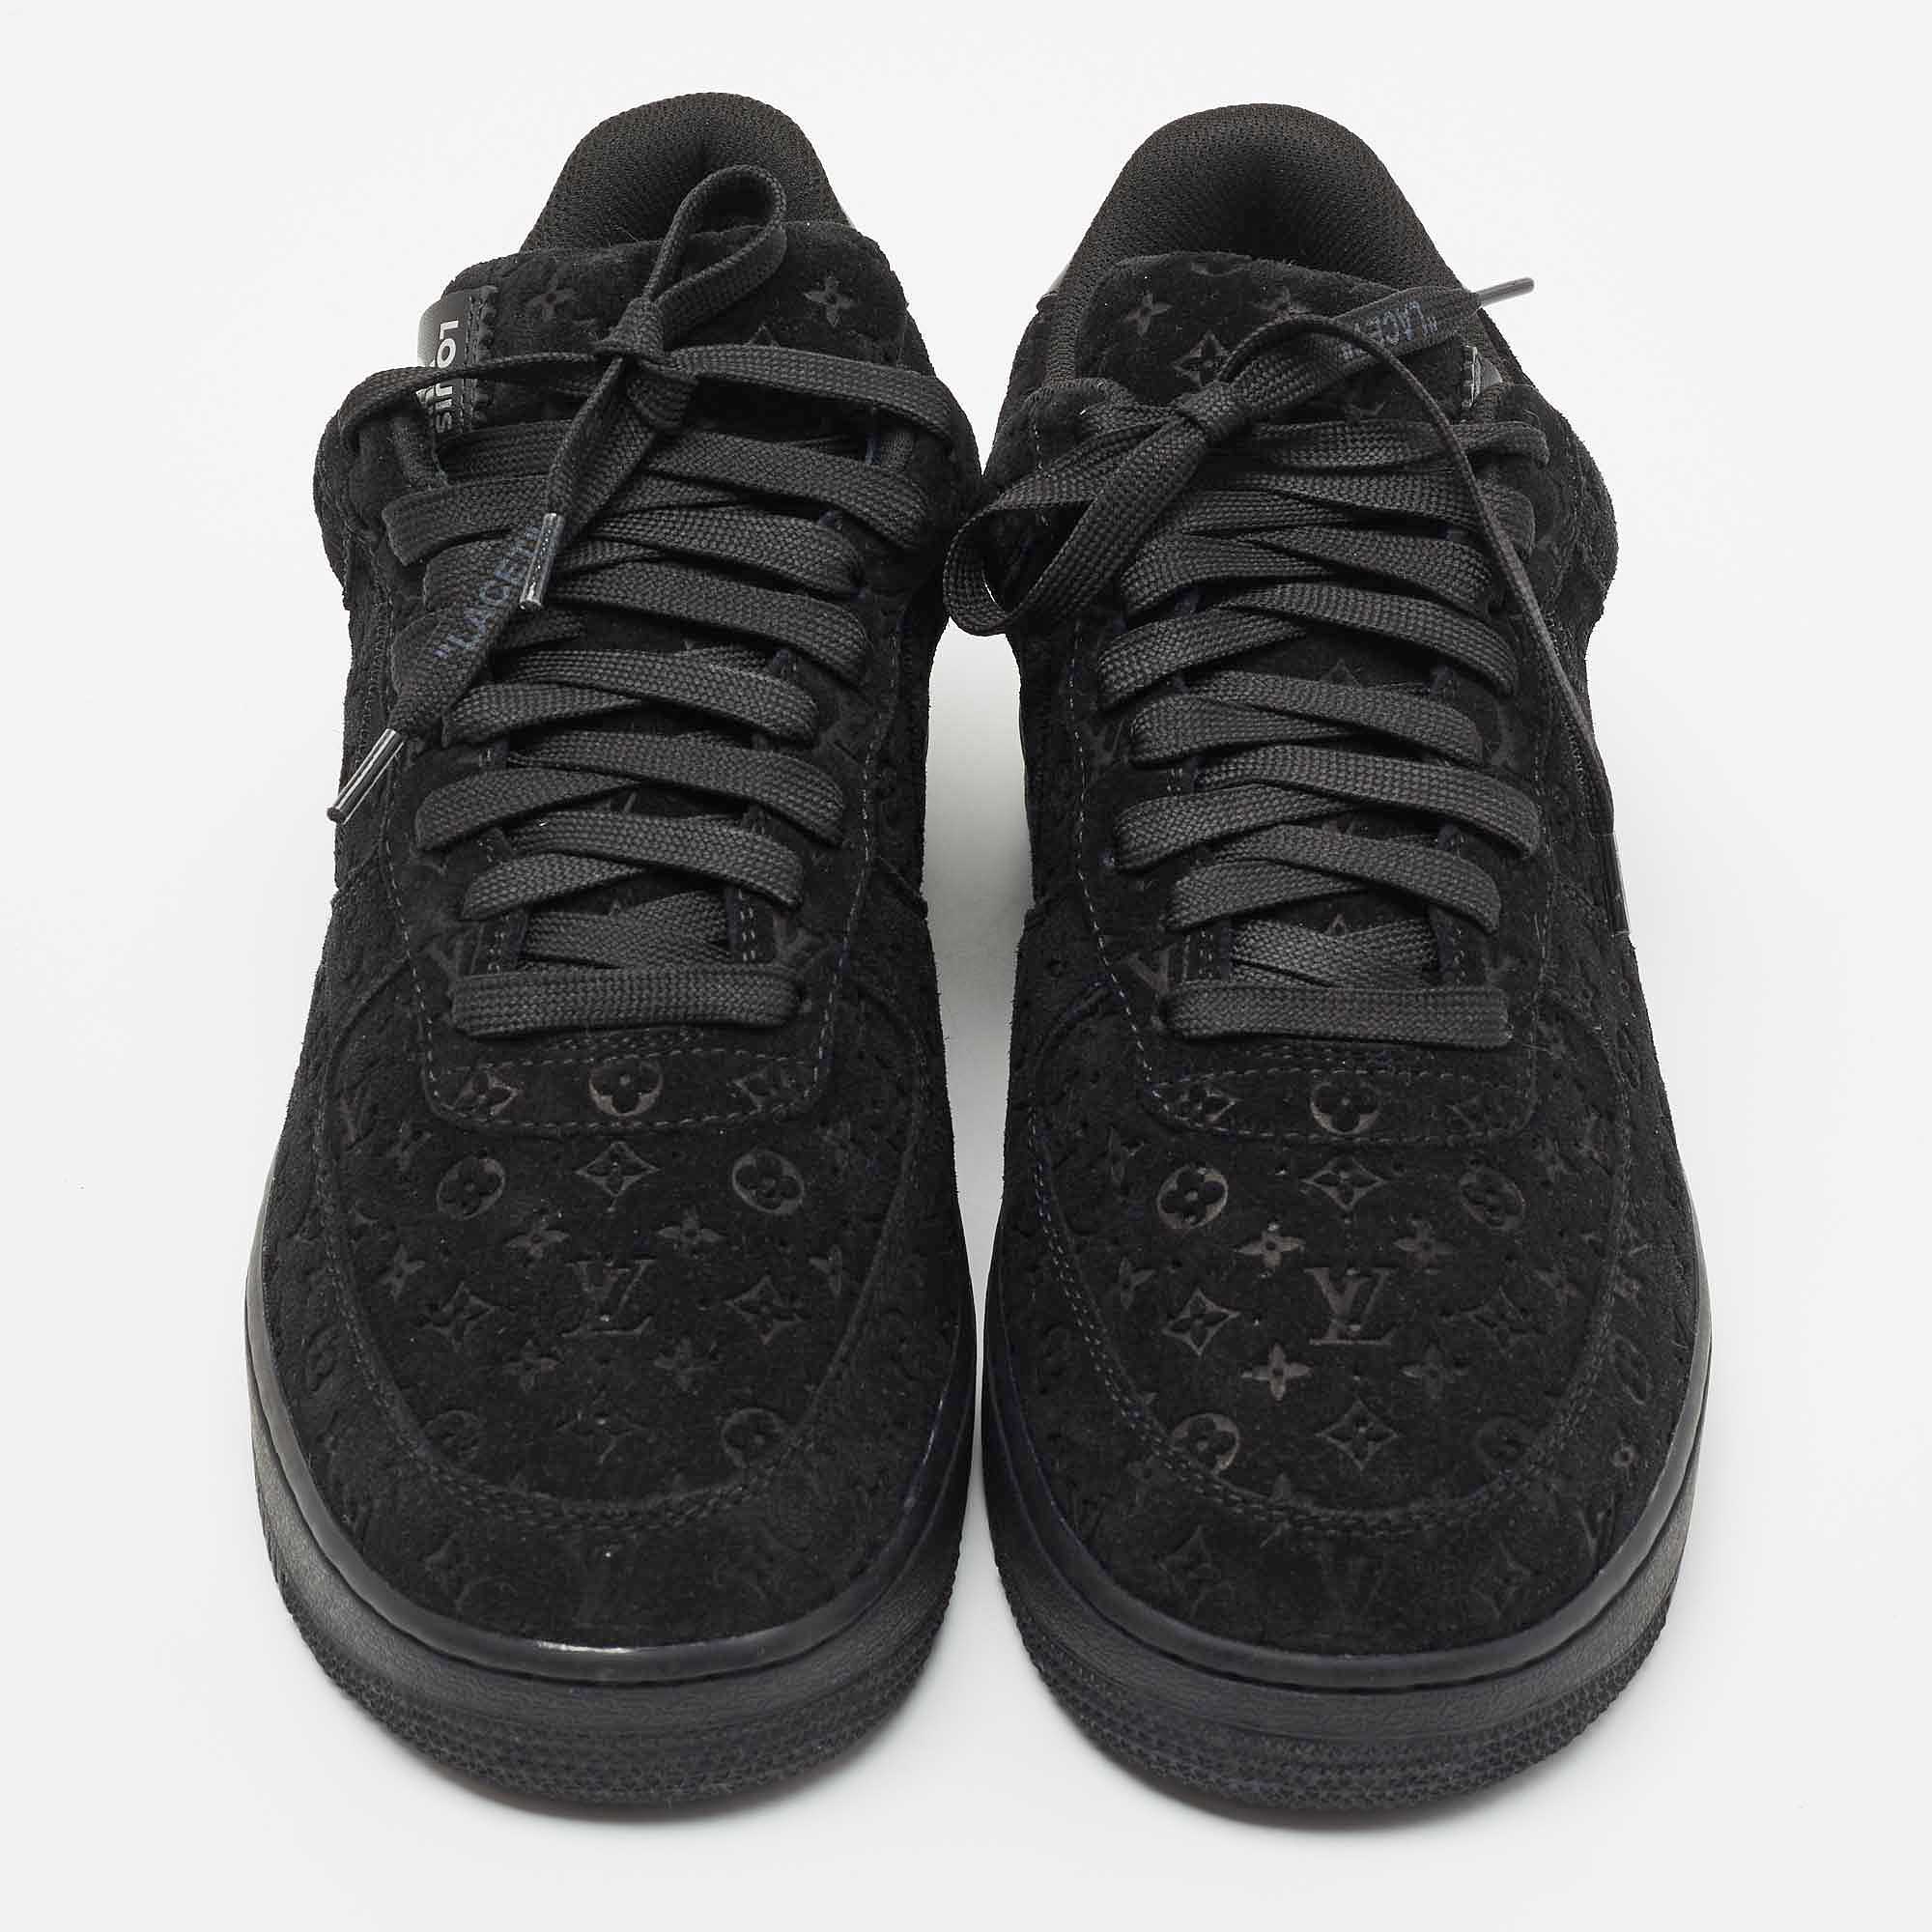 LOUIS VUITTON X AIR FORCE 1 BLACK SUEDE SNEAKERS BY VIRGIL SIZE